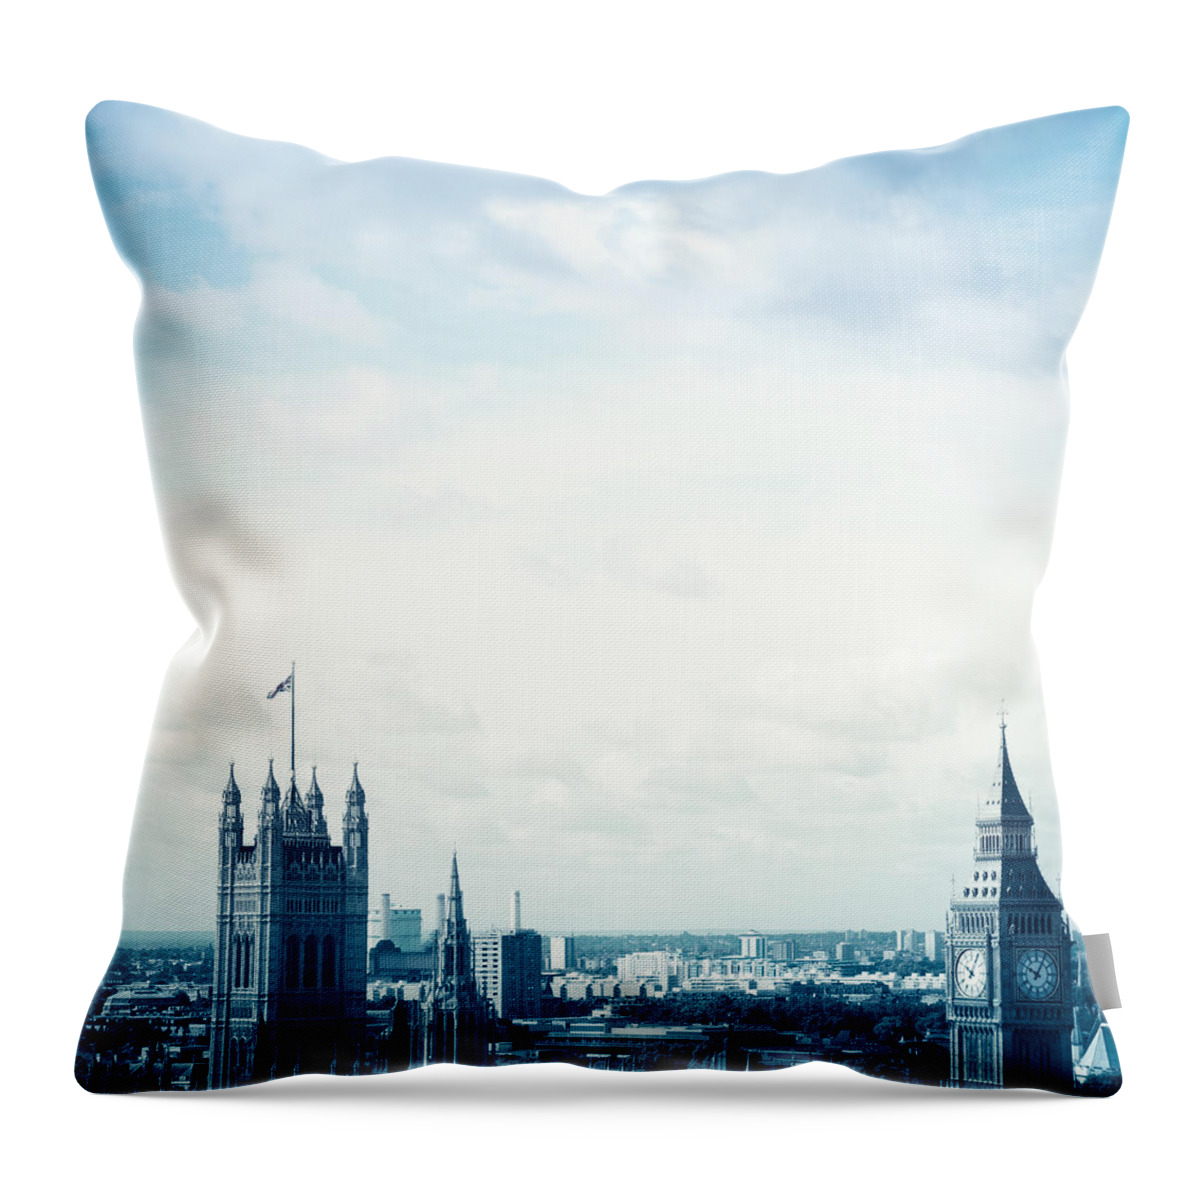 Clock Tower Throw Pillow featuring the photograph London Big Ben And House Of Parliament #6 by Franckreporter